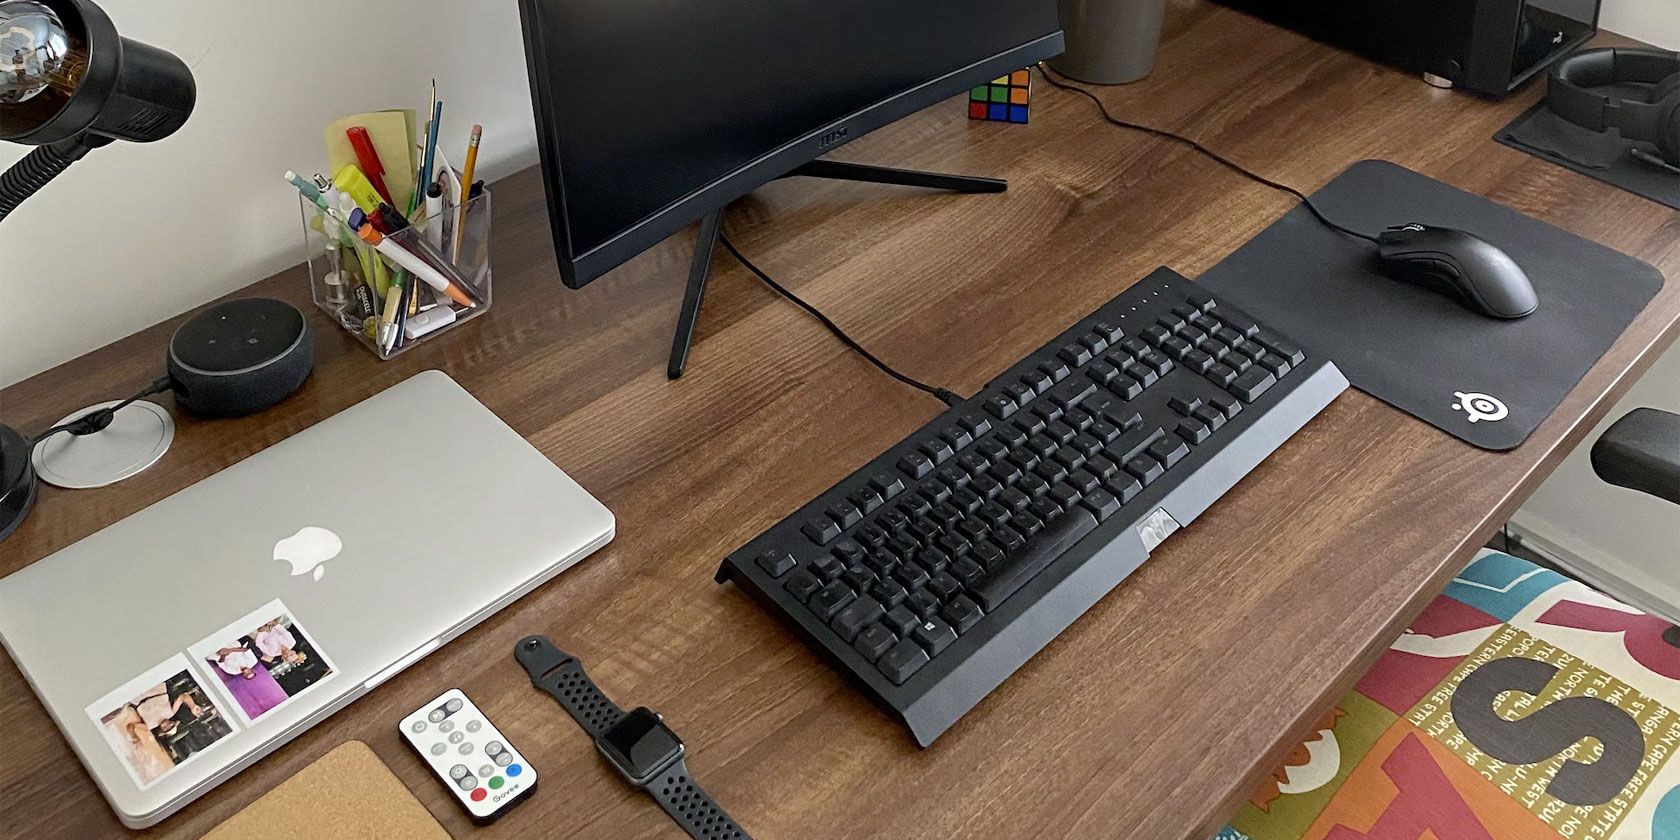 A desk with many objects including a laptop, keyboard, and Amazon Echo Dot